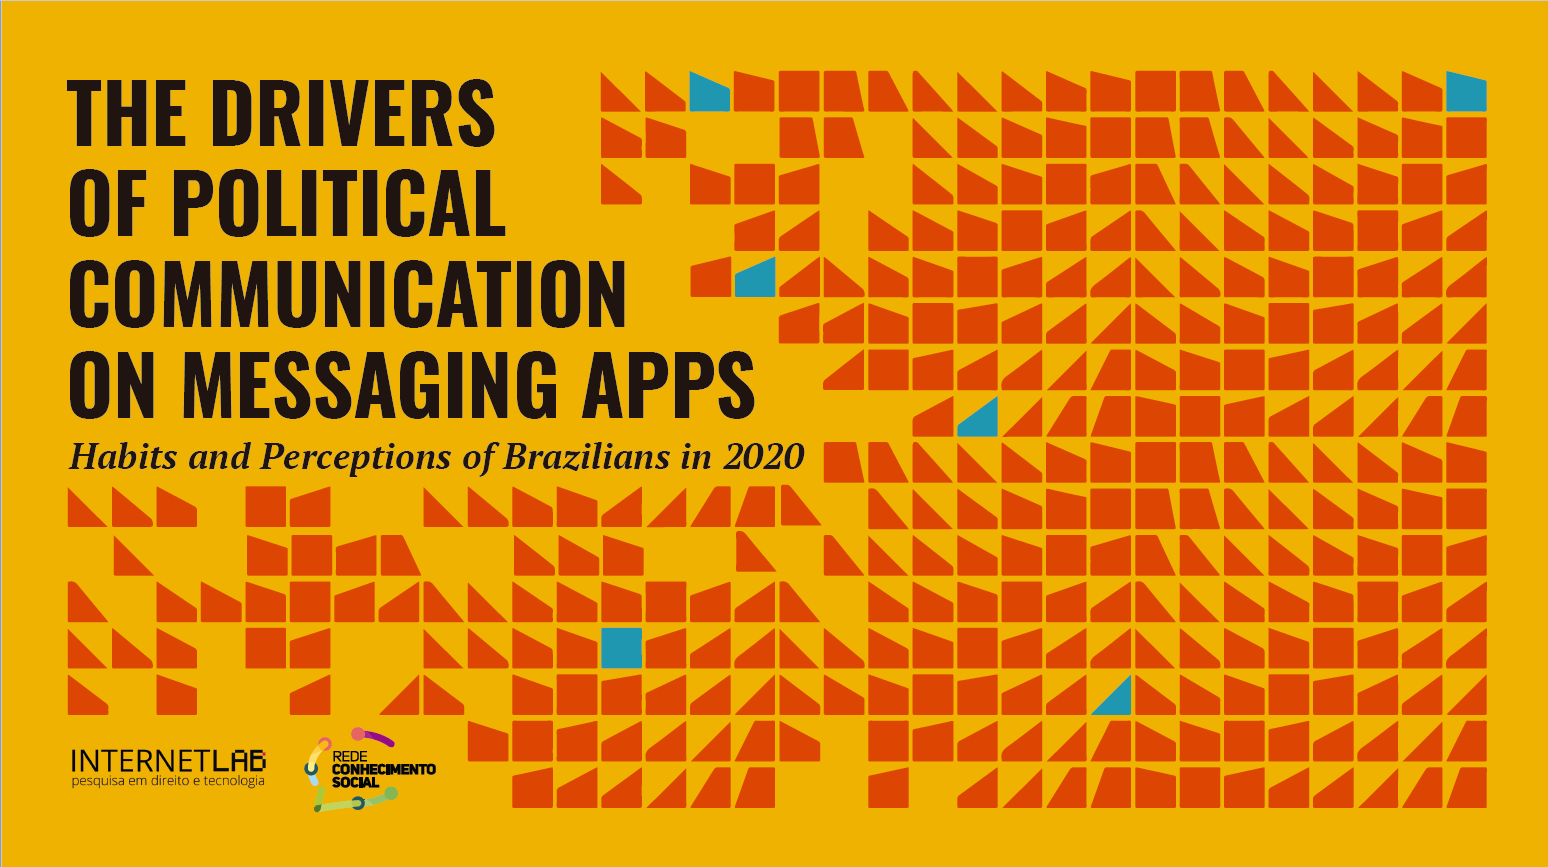 Image on a yellow background that says: The drivers of political communication on messsaging apps". There are geometrical shapes in blue and red.